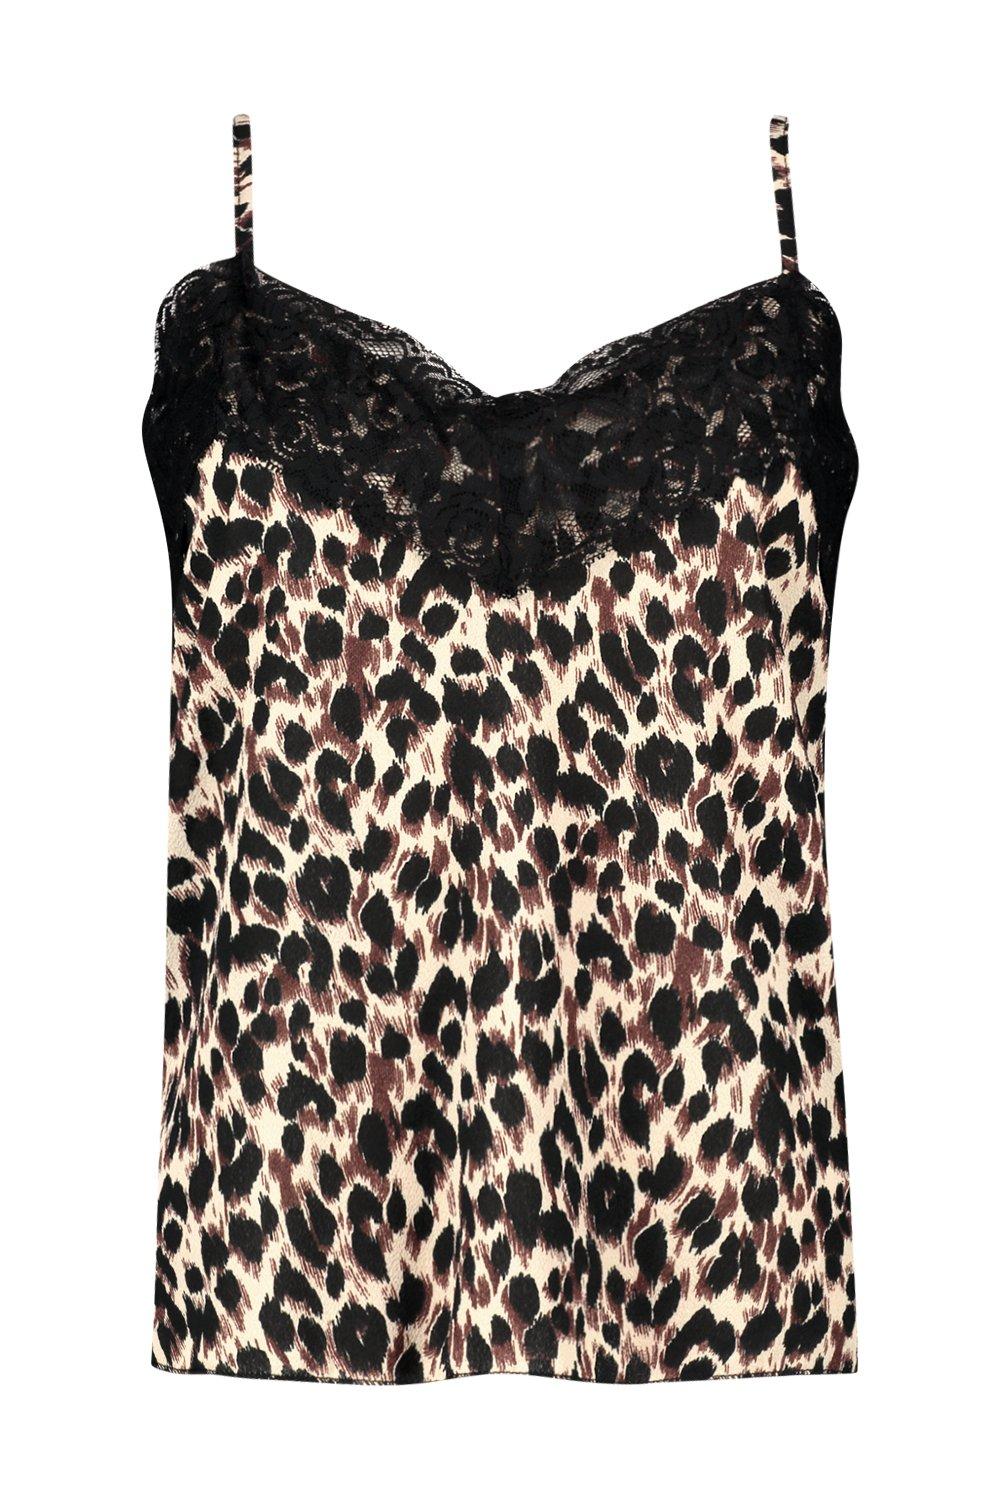 Wholesale Women's Leopard Stitching Lace Loose Camisole Top